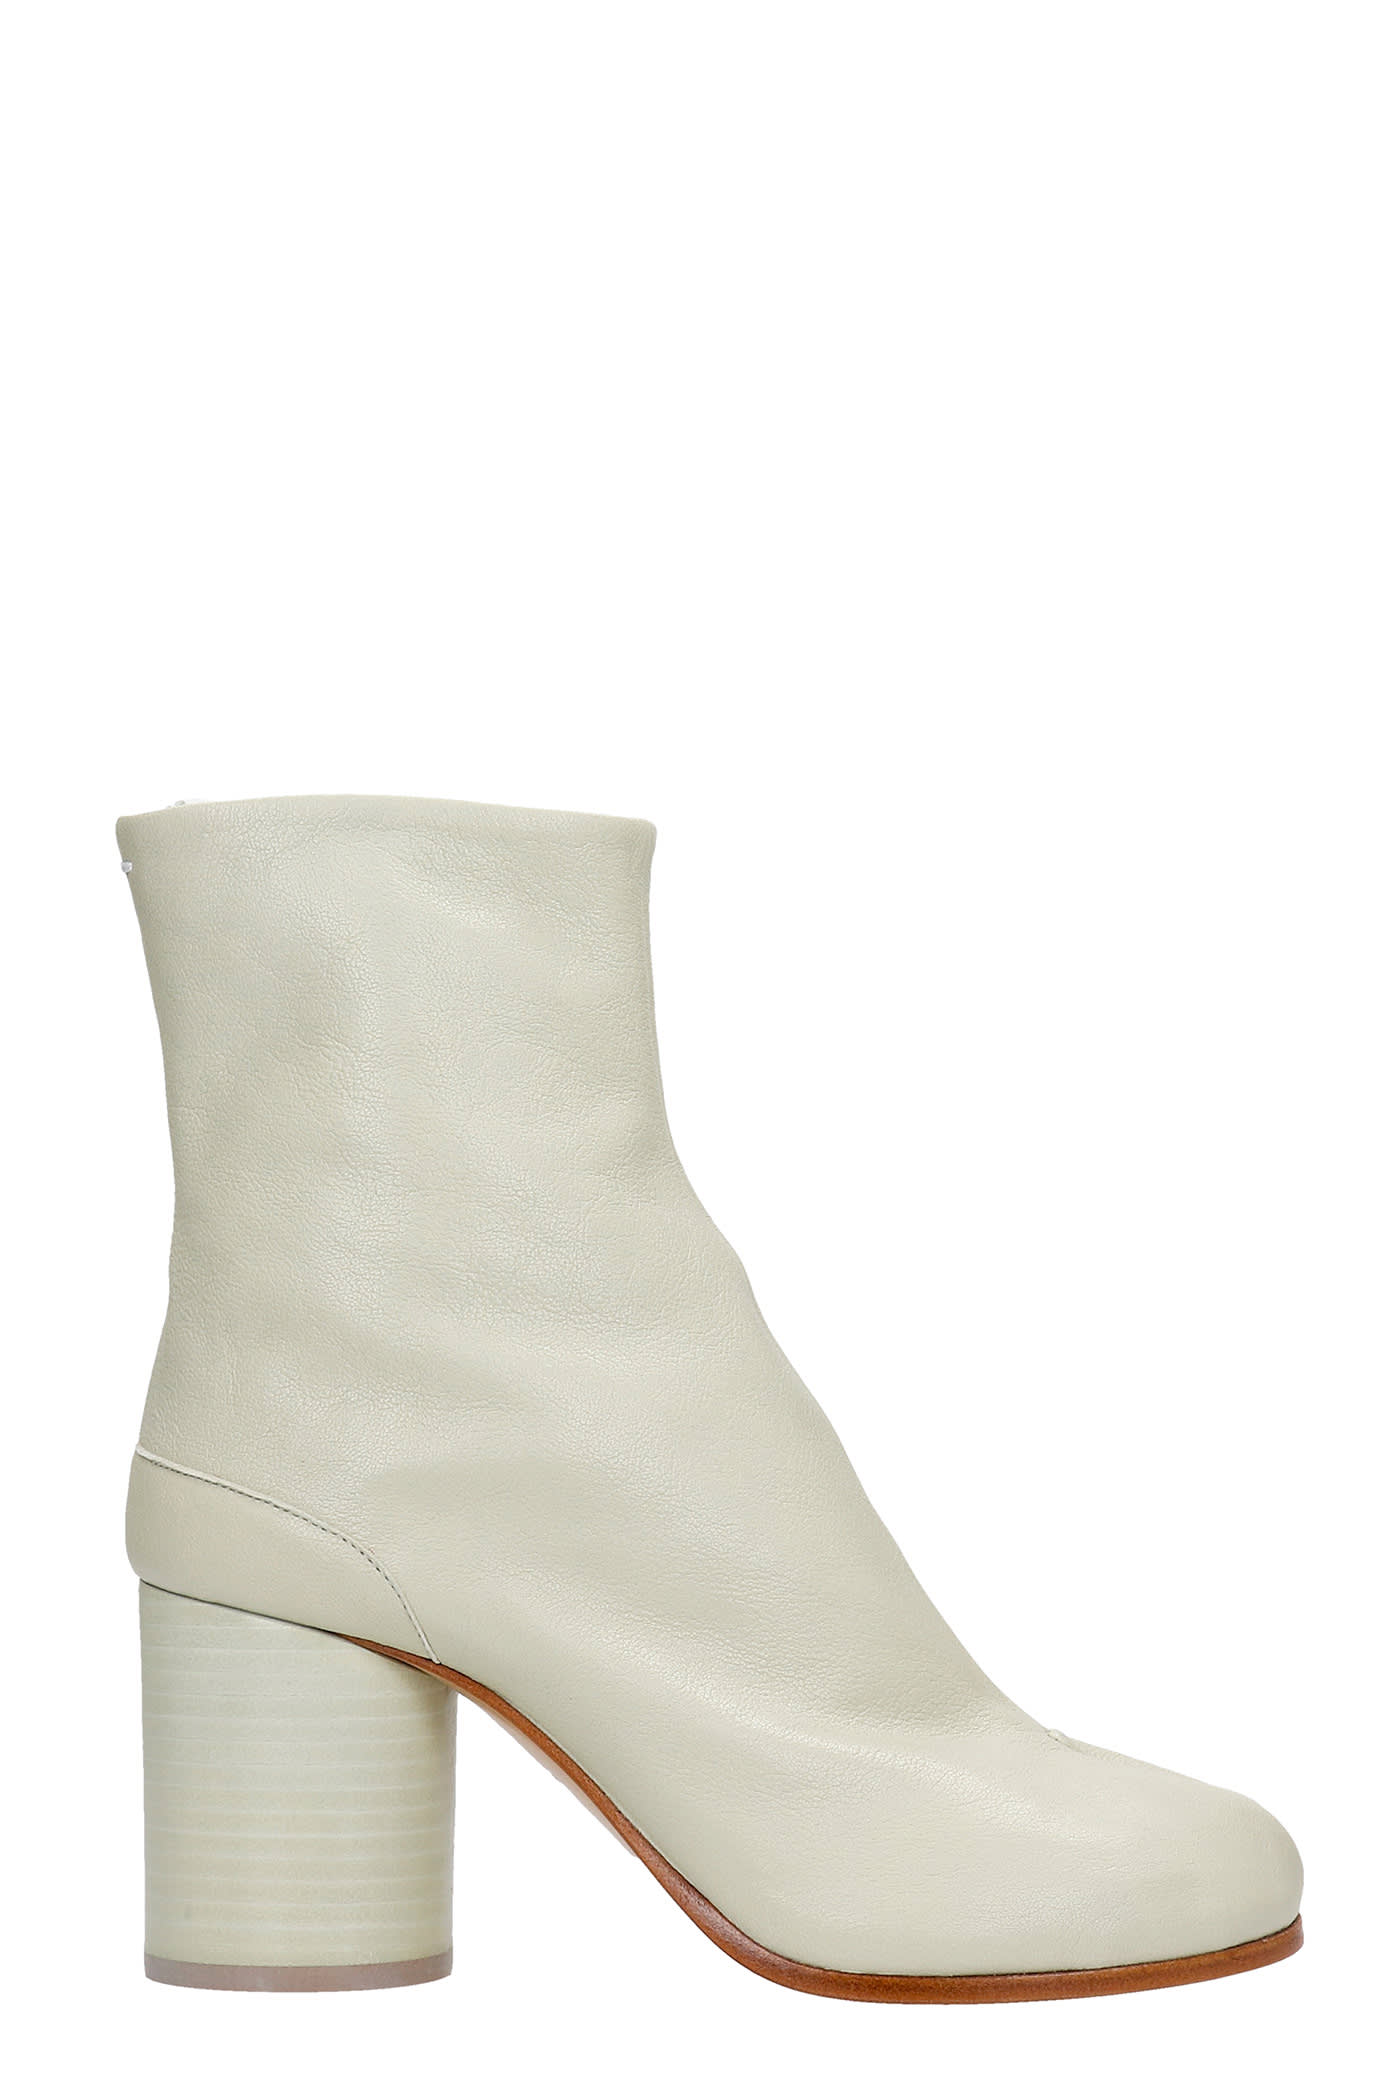 Buy Maison Margiela Tabi High Heels Ankle Boots In Green Leather online, shop Maison Margiela shoes with free shipping